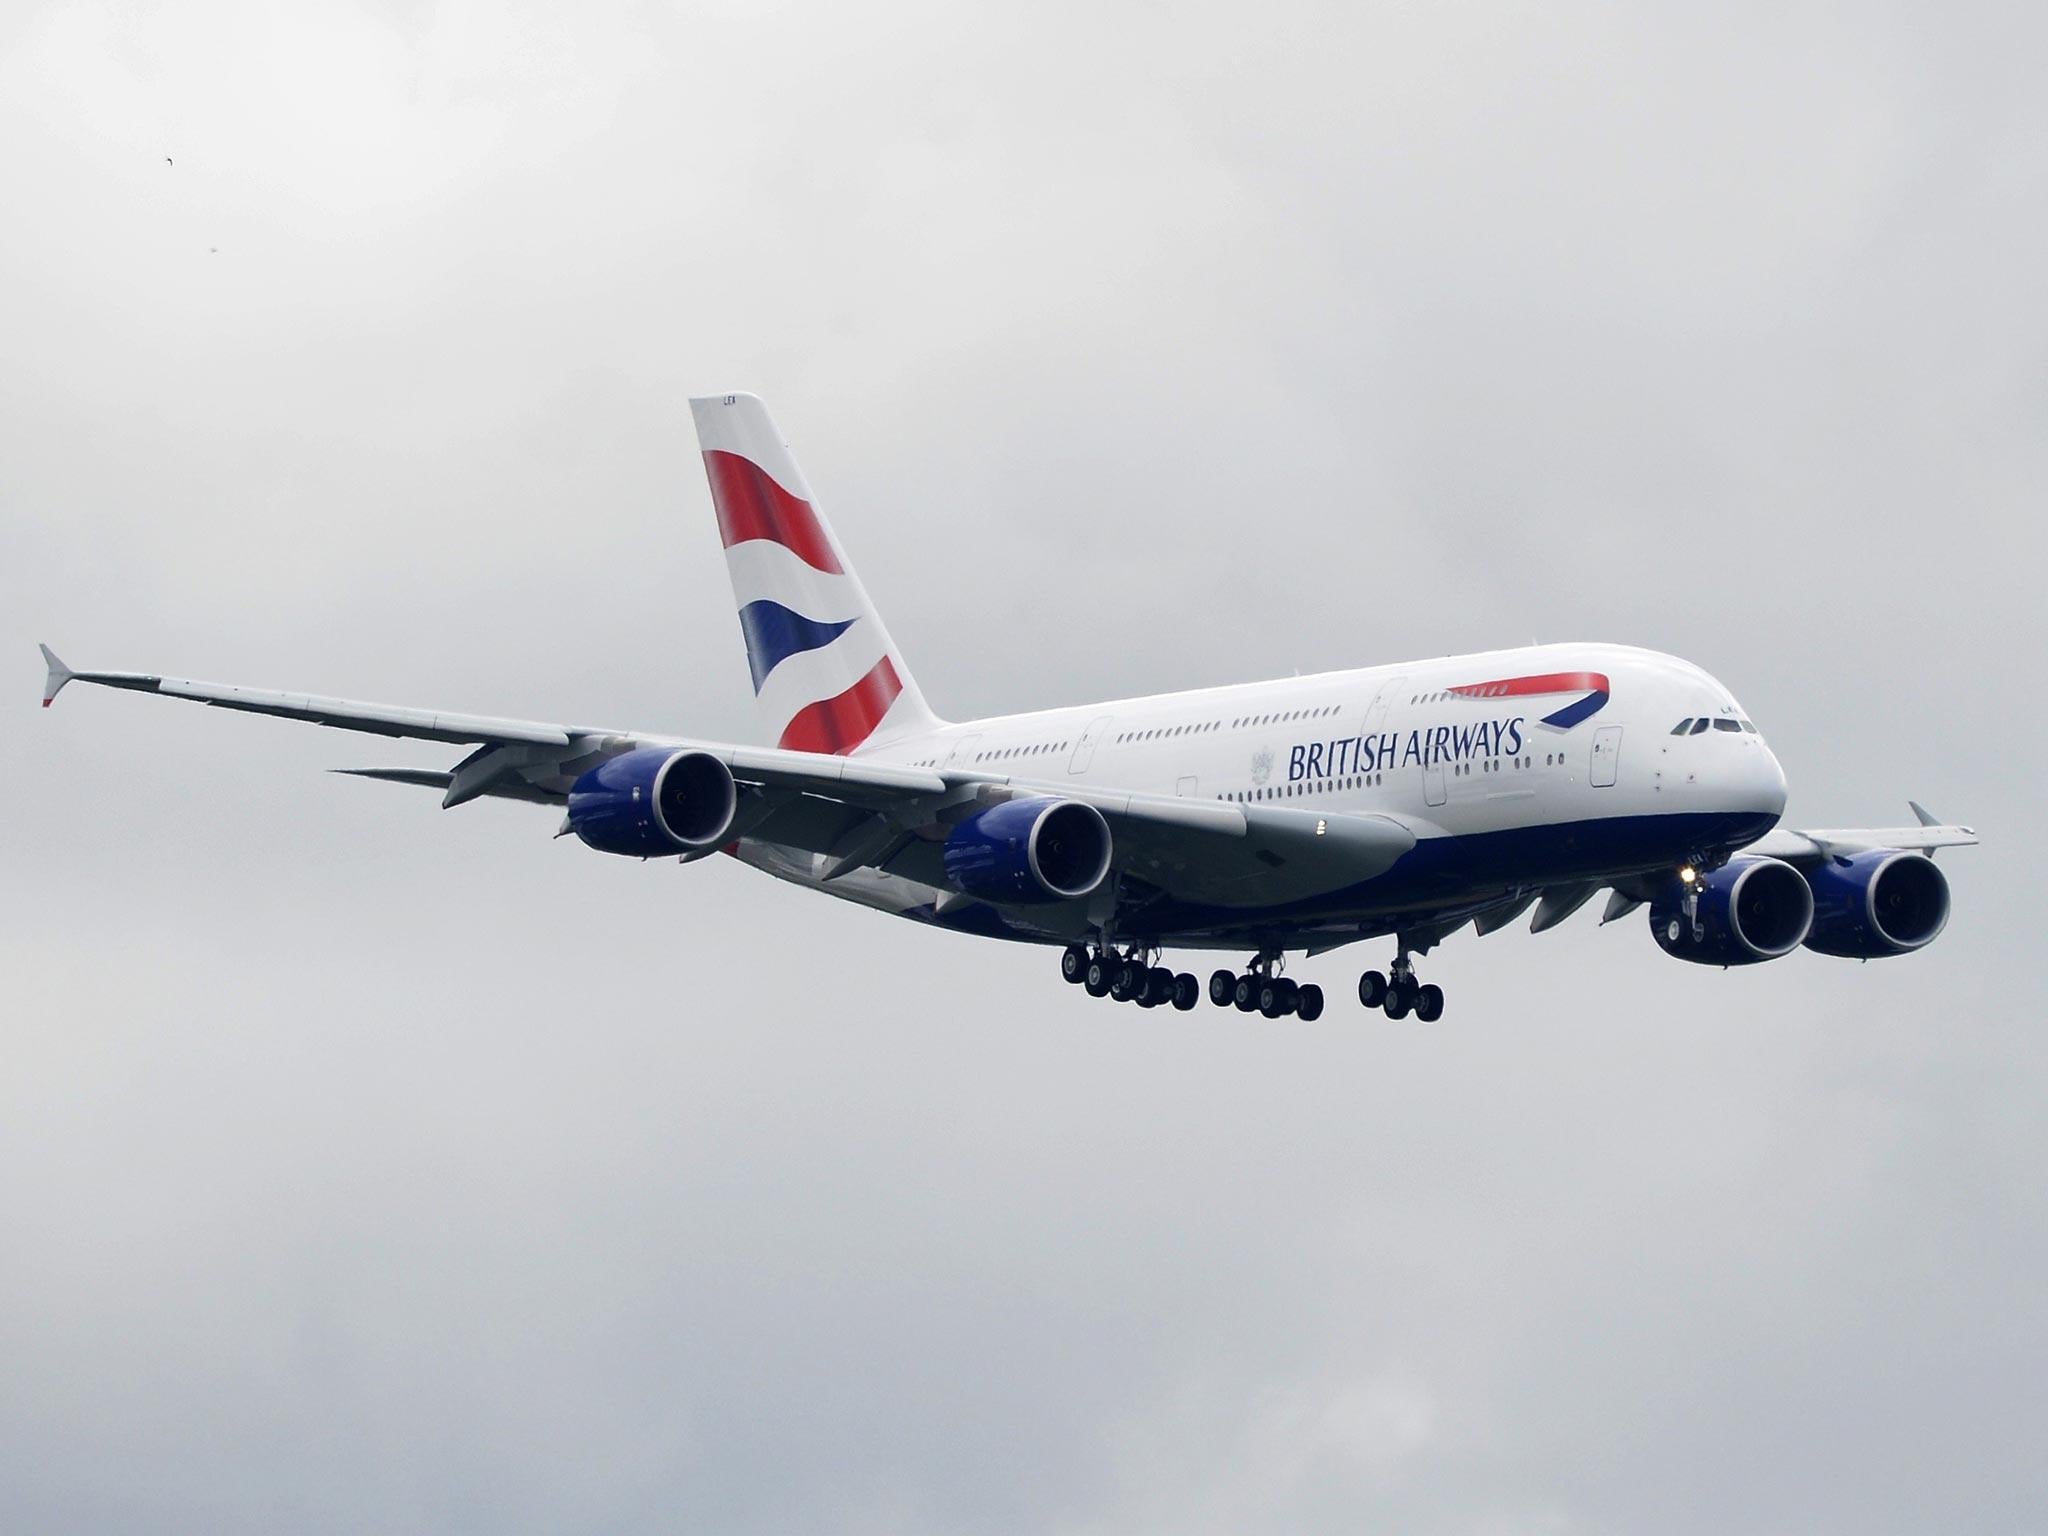 4 July 2013: British Airways' new Airbus A380 comes in to land at Heathrow airport in London